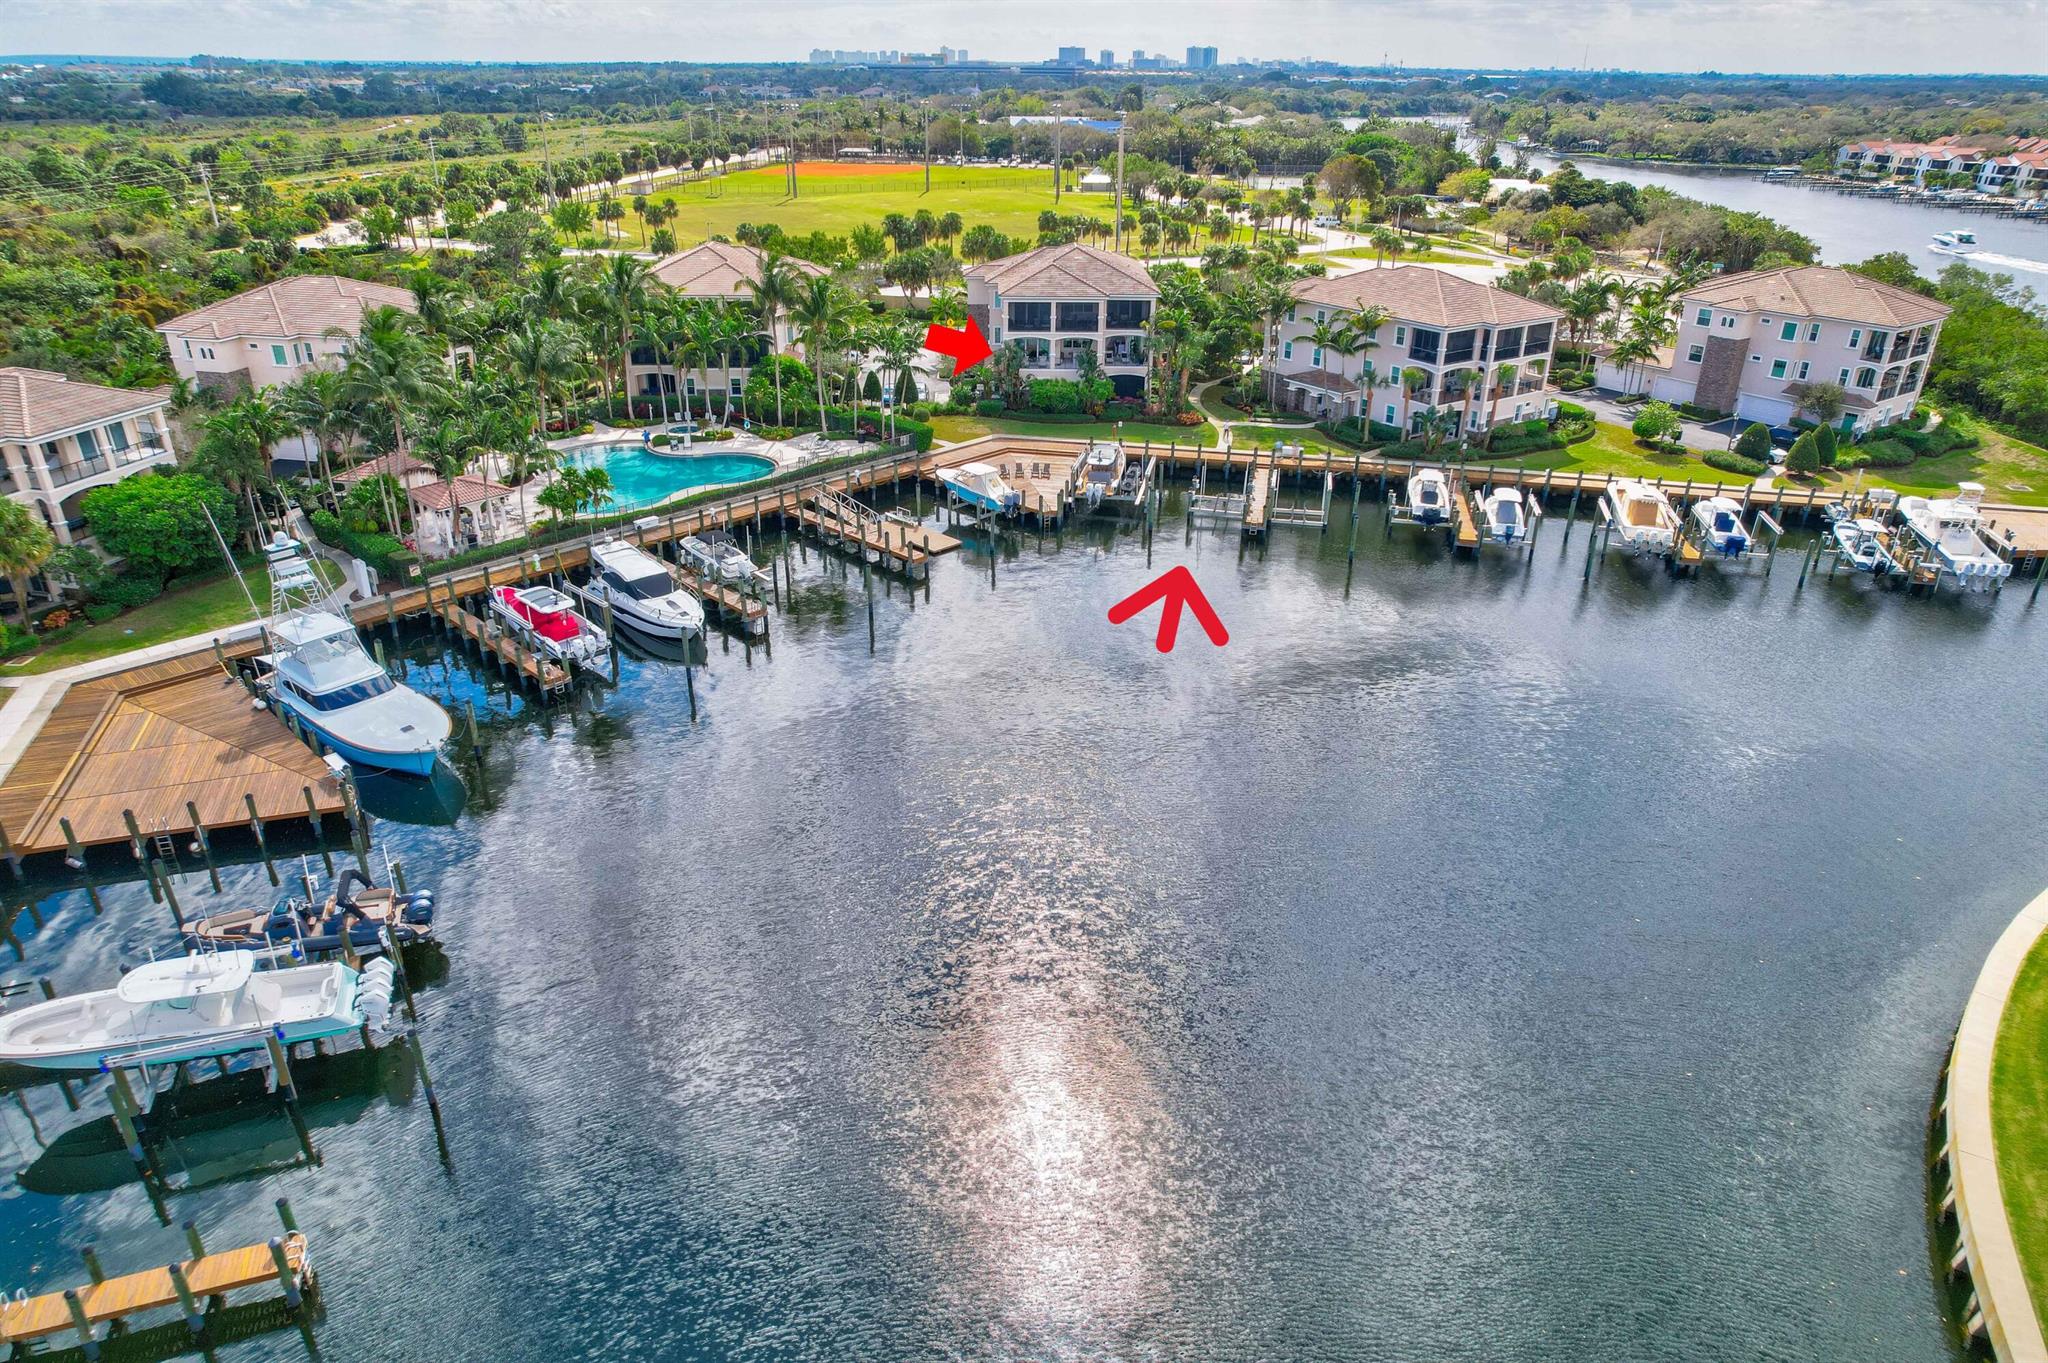 Waterfront living at its finest! Located on the 2nd floor, enjoy spectacular views of the Intracoastal waterway from the expansive private balcony with access from the Living/Dining rooms and Master Suite! Steps to your own Private dock on deep water with a 17,000lb boat lift. Slip is 22' wide and can accommodate up to a 65 ft. vessel. A boater's dream! Ocean access, no fixed bridges & just minutes to PB Inlet & Jupiter Inlet. Great for entertaining, this spacious open floorplan offers a beautiful chef's kitchen boasting high end professional appliances by Wolf, Sub-Zero, and Bosch, custom cabinetry, white quartz countertops, an oversized island, wine fridge & custom lighting. Beautiful hardwood & marble floors throughout! The Master Suite features custom limestone shower & a Jacuzzi tub. This home also features volume ceilings, electric phantom screens on the main balcony, impact windows and doors, a private elevator and 2-car private garage with epoxy floor. 
Frenchman's Harbor is 24hr manned gated community conveniently located close to fabulous shopping and restaurants, golf and pristine beaches. Close to I-95, the Turnpike and PBIA.